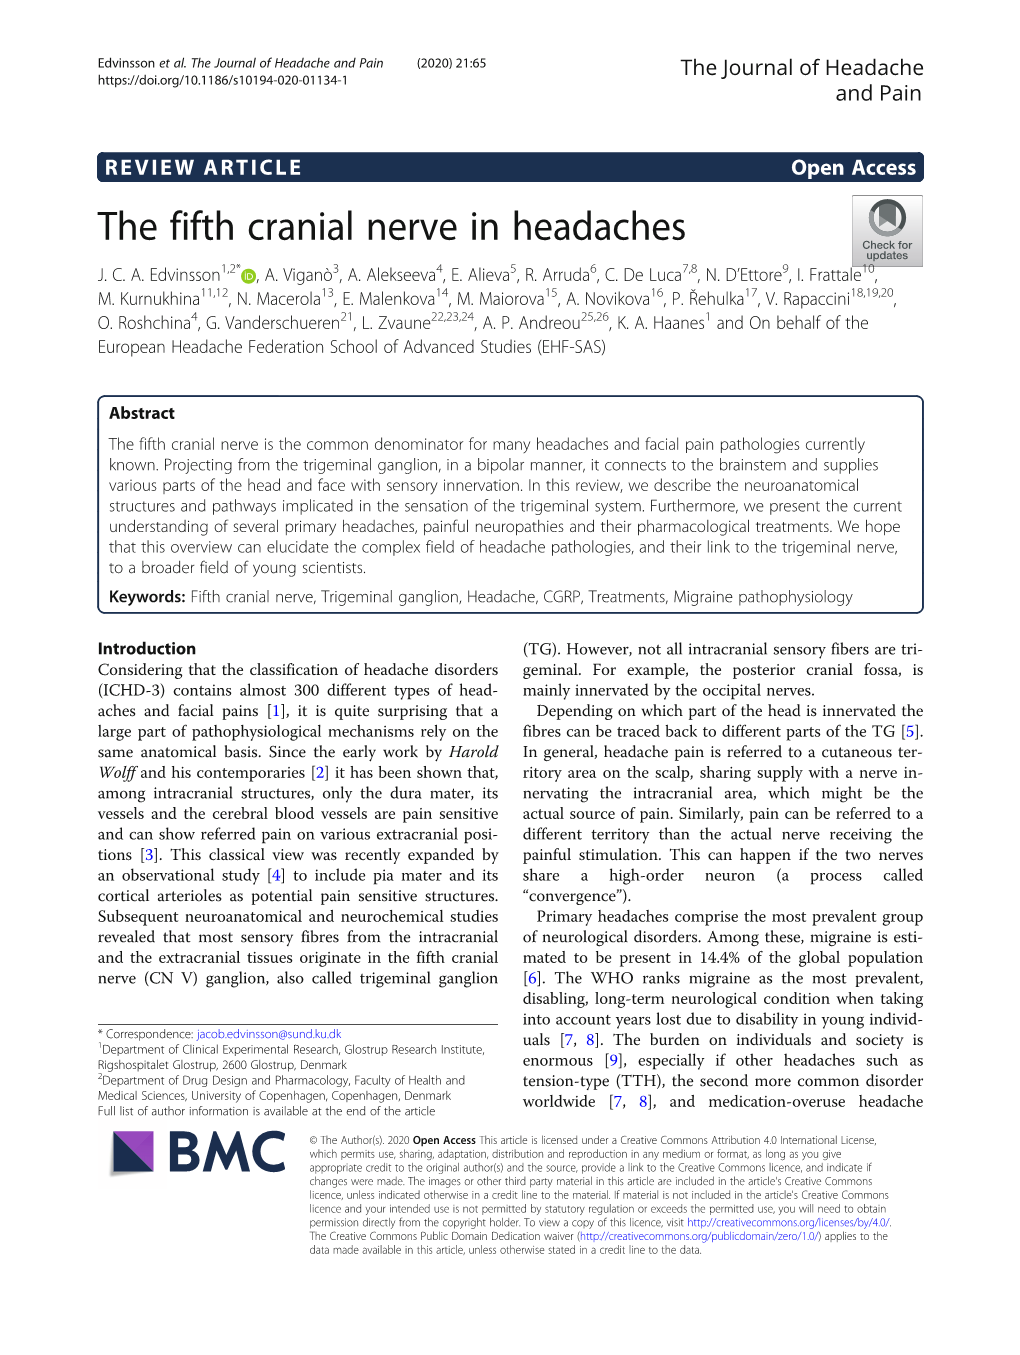 The Fifth Cranial Nerve in Headaches J